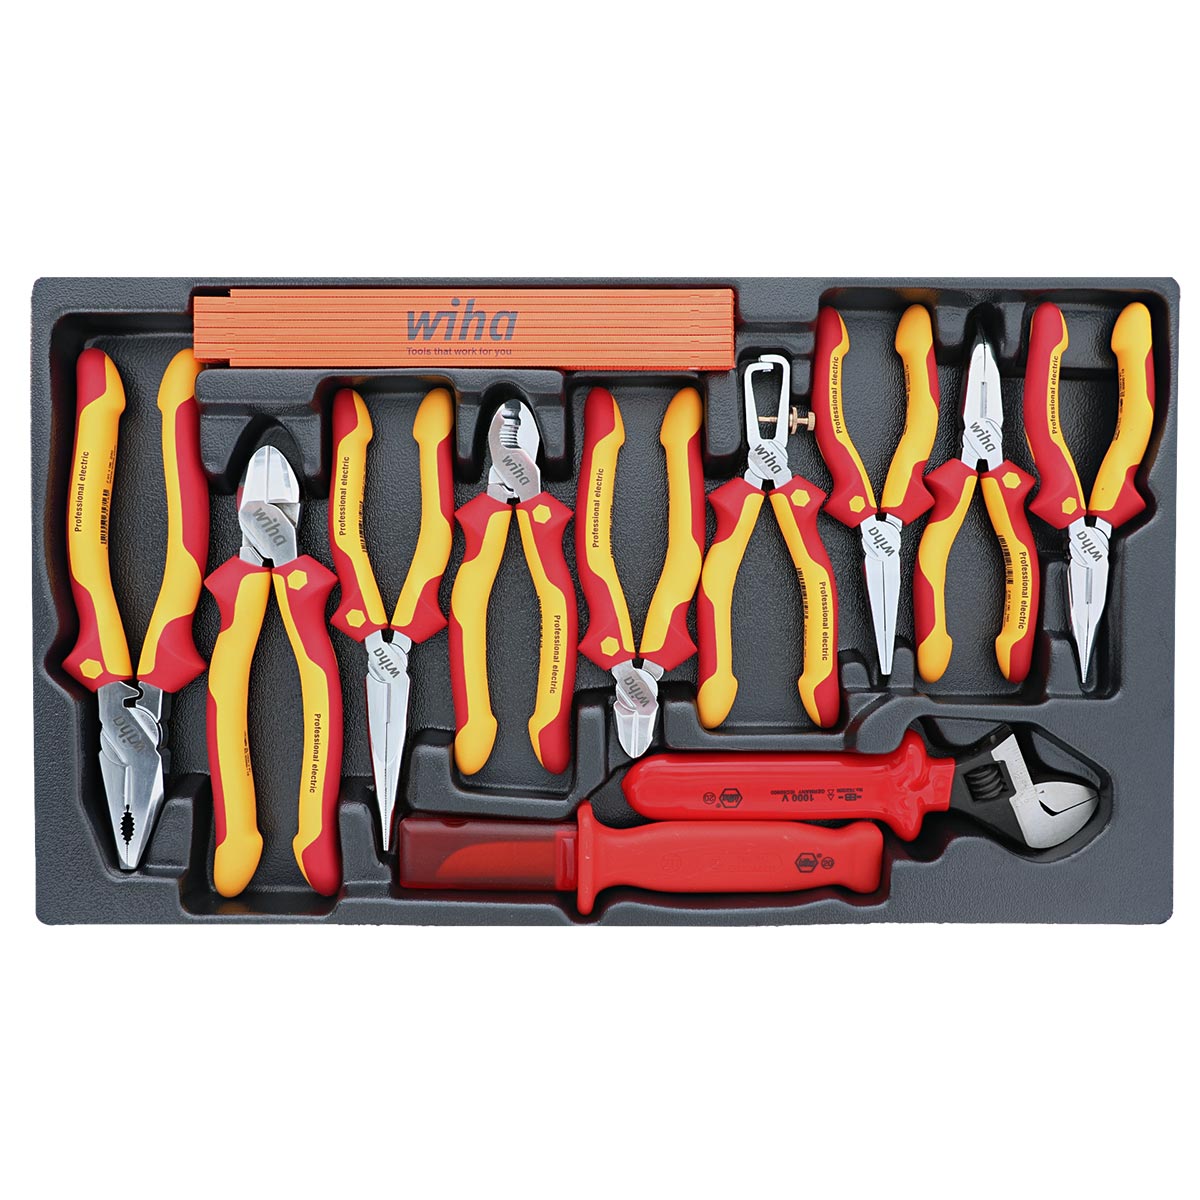 Wiha Master Electricians Insulated Tools Set In Rolling Hard Case - 80 Piece Set